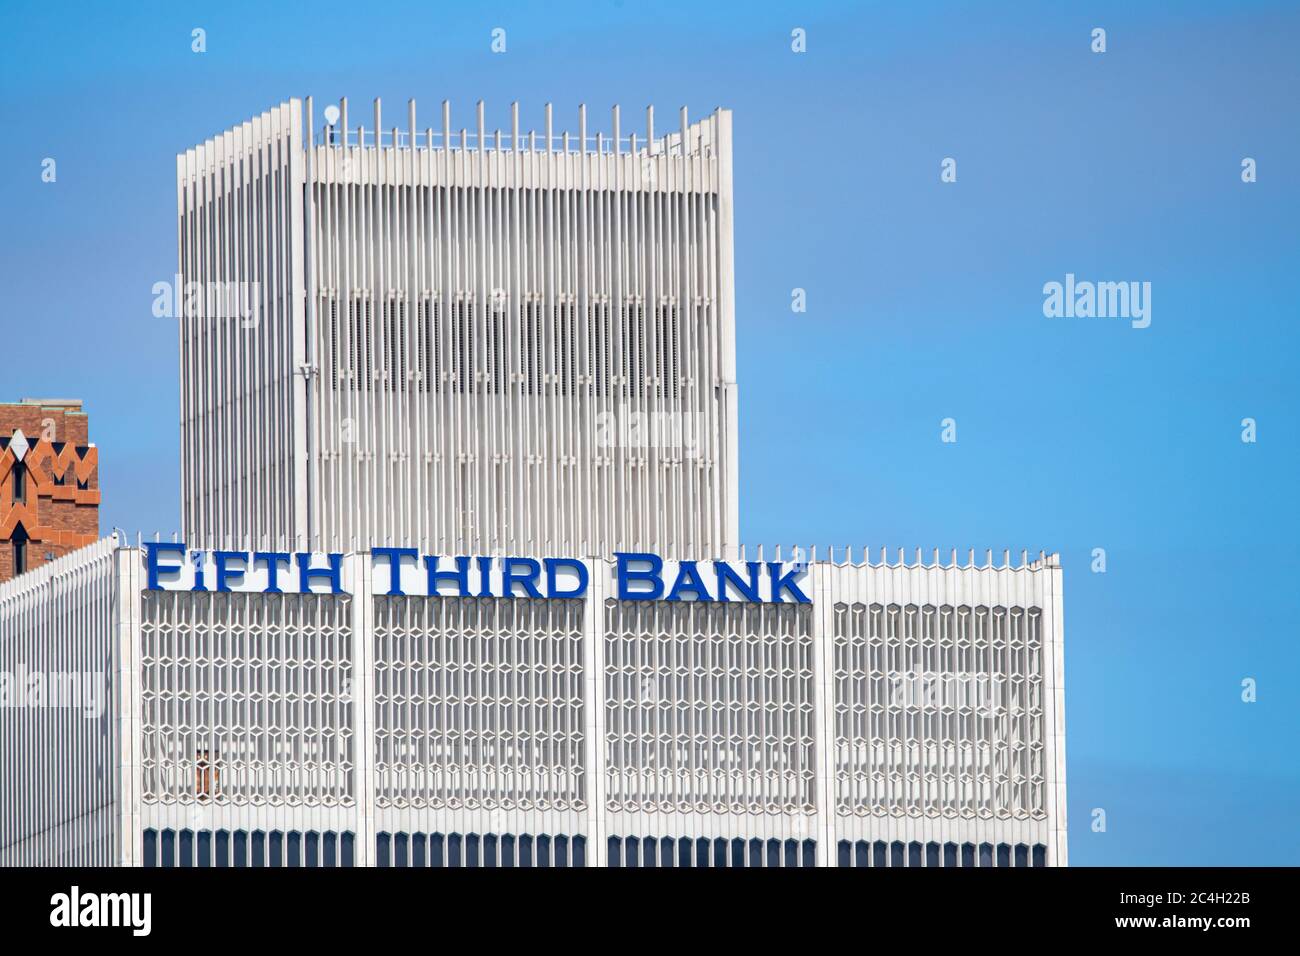 Fifth Third Bank, an American banking company logo seen atop of One Woodward office building in downtown Detroit, Michigan. Stock Photo